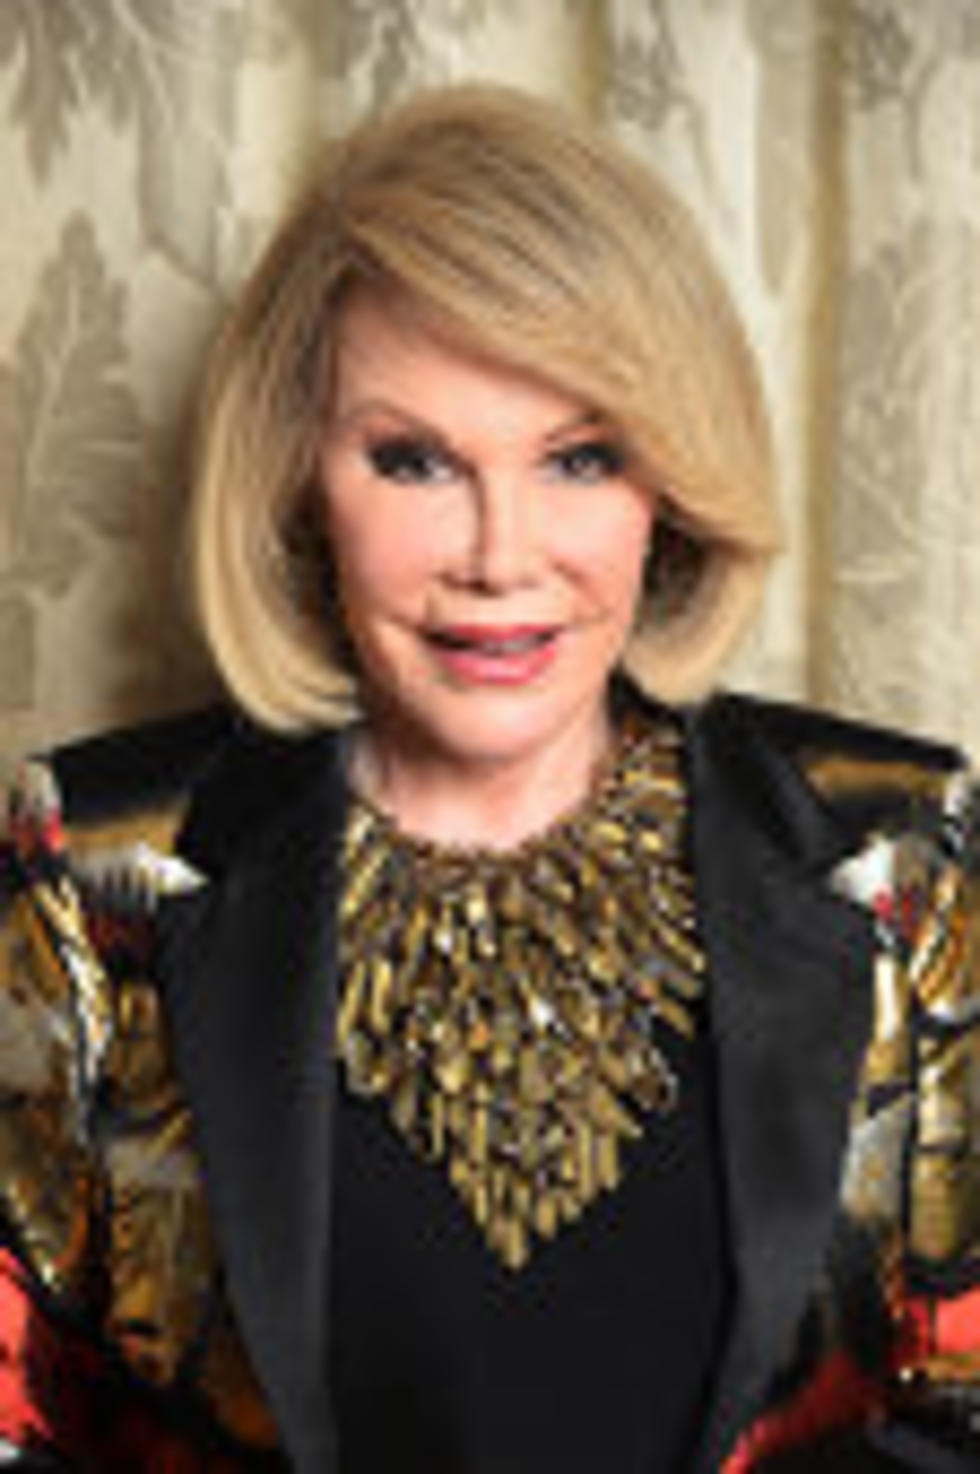 Broadway Dims Their Lights For Joan Rivers – Except For A Few Theaters